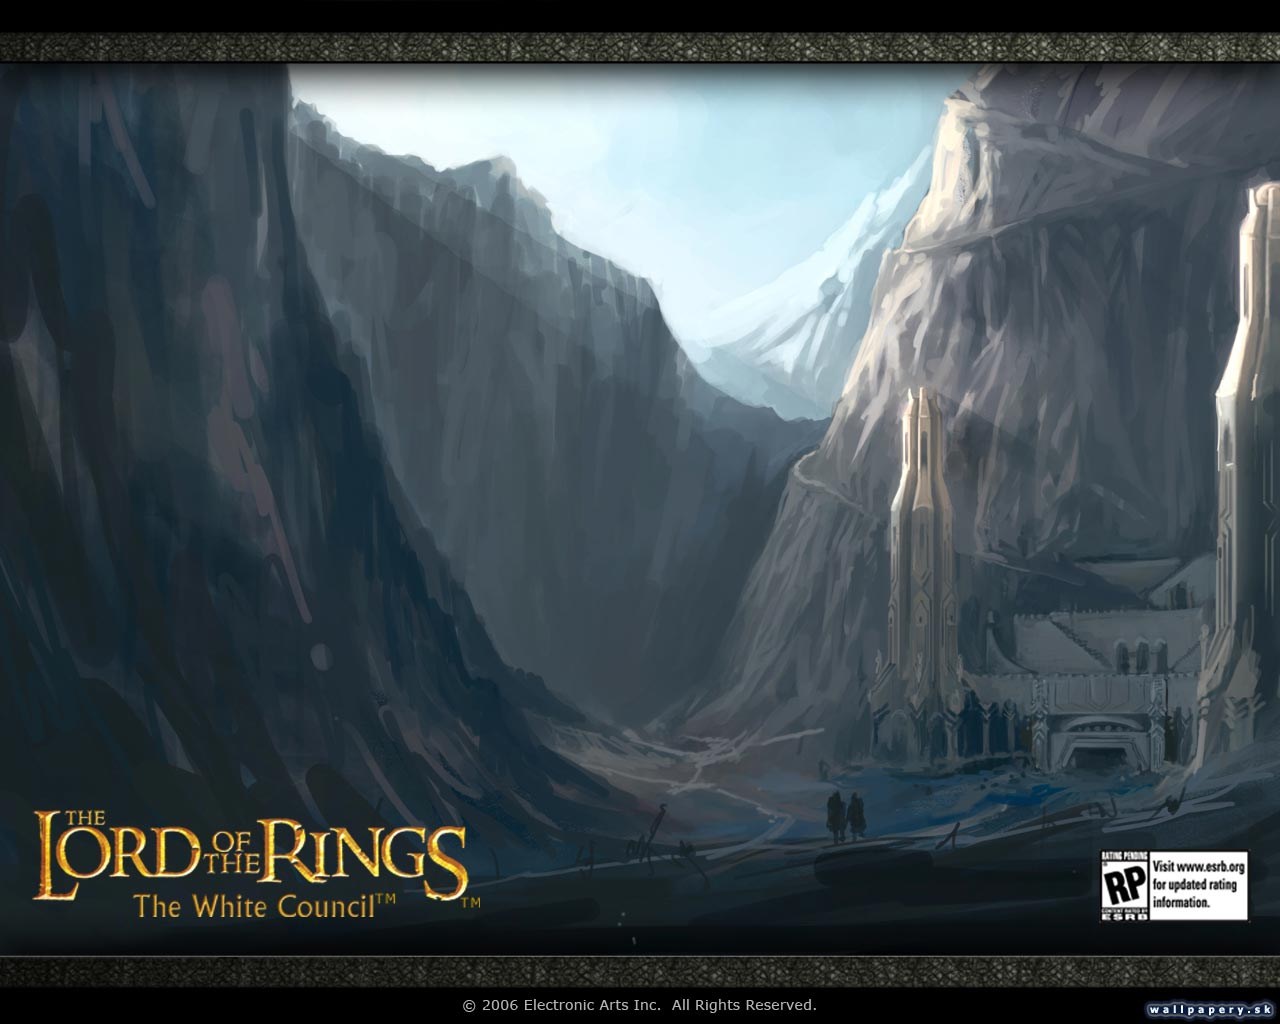 The Lord of the Rings: The White Council - wallpaper 6